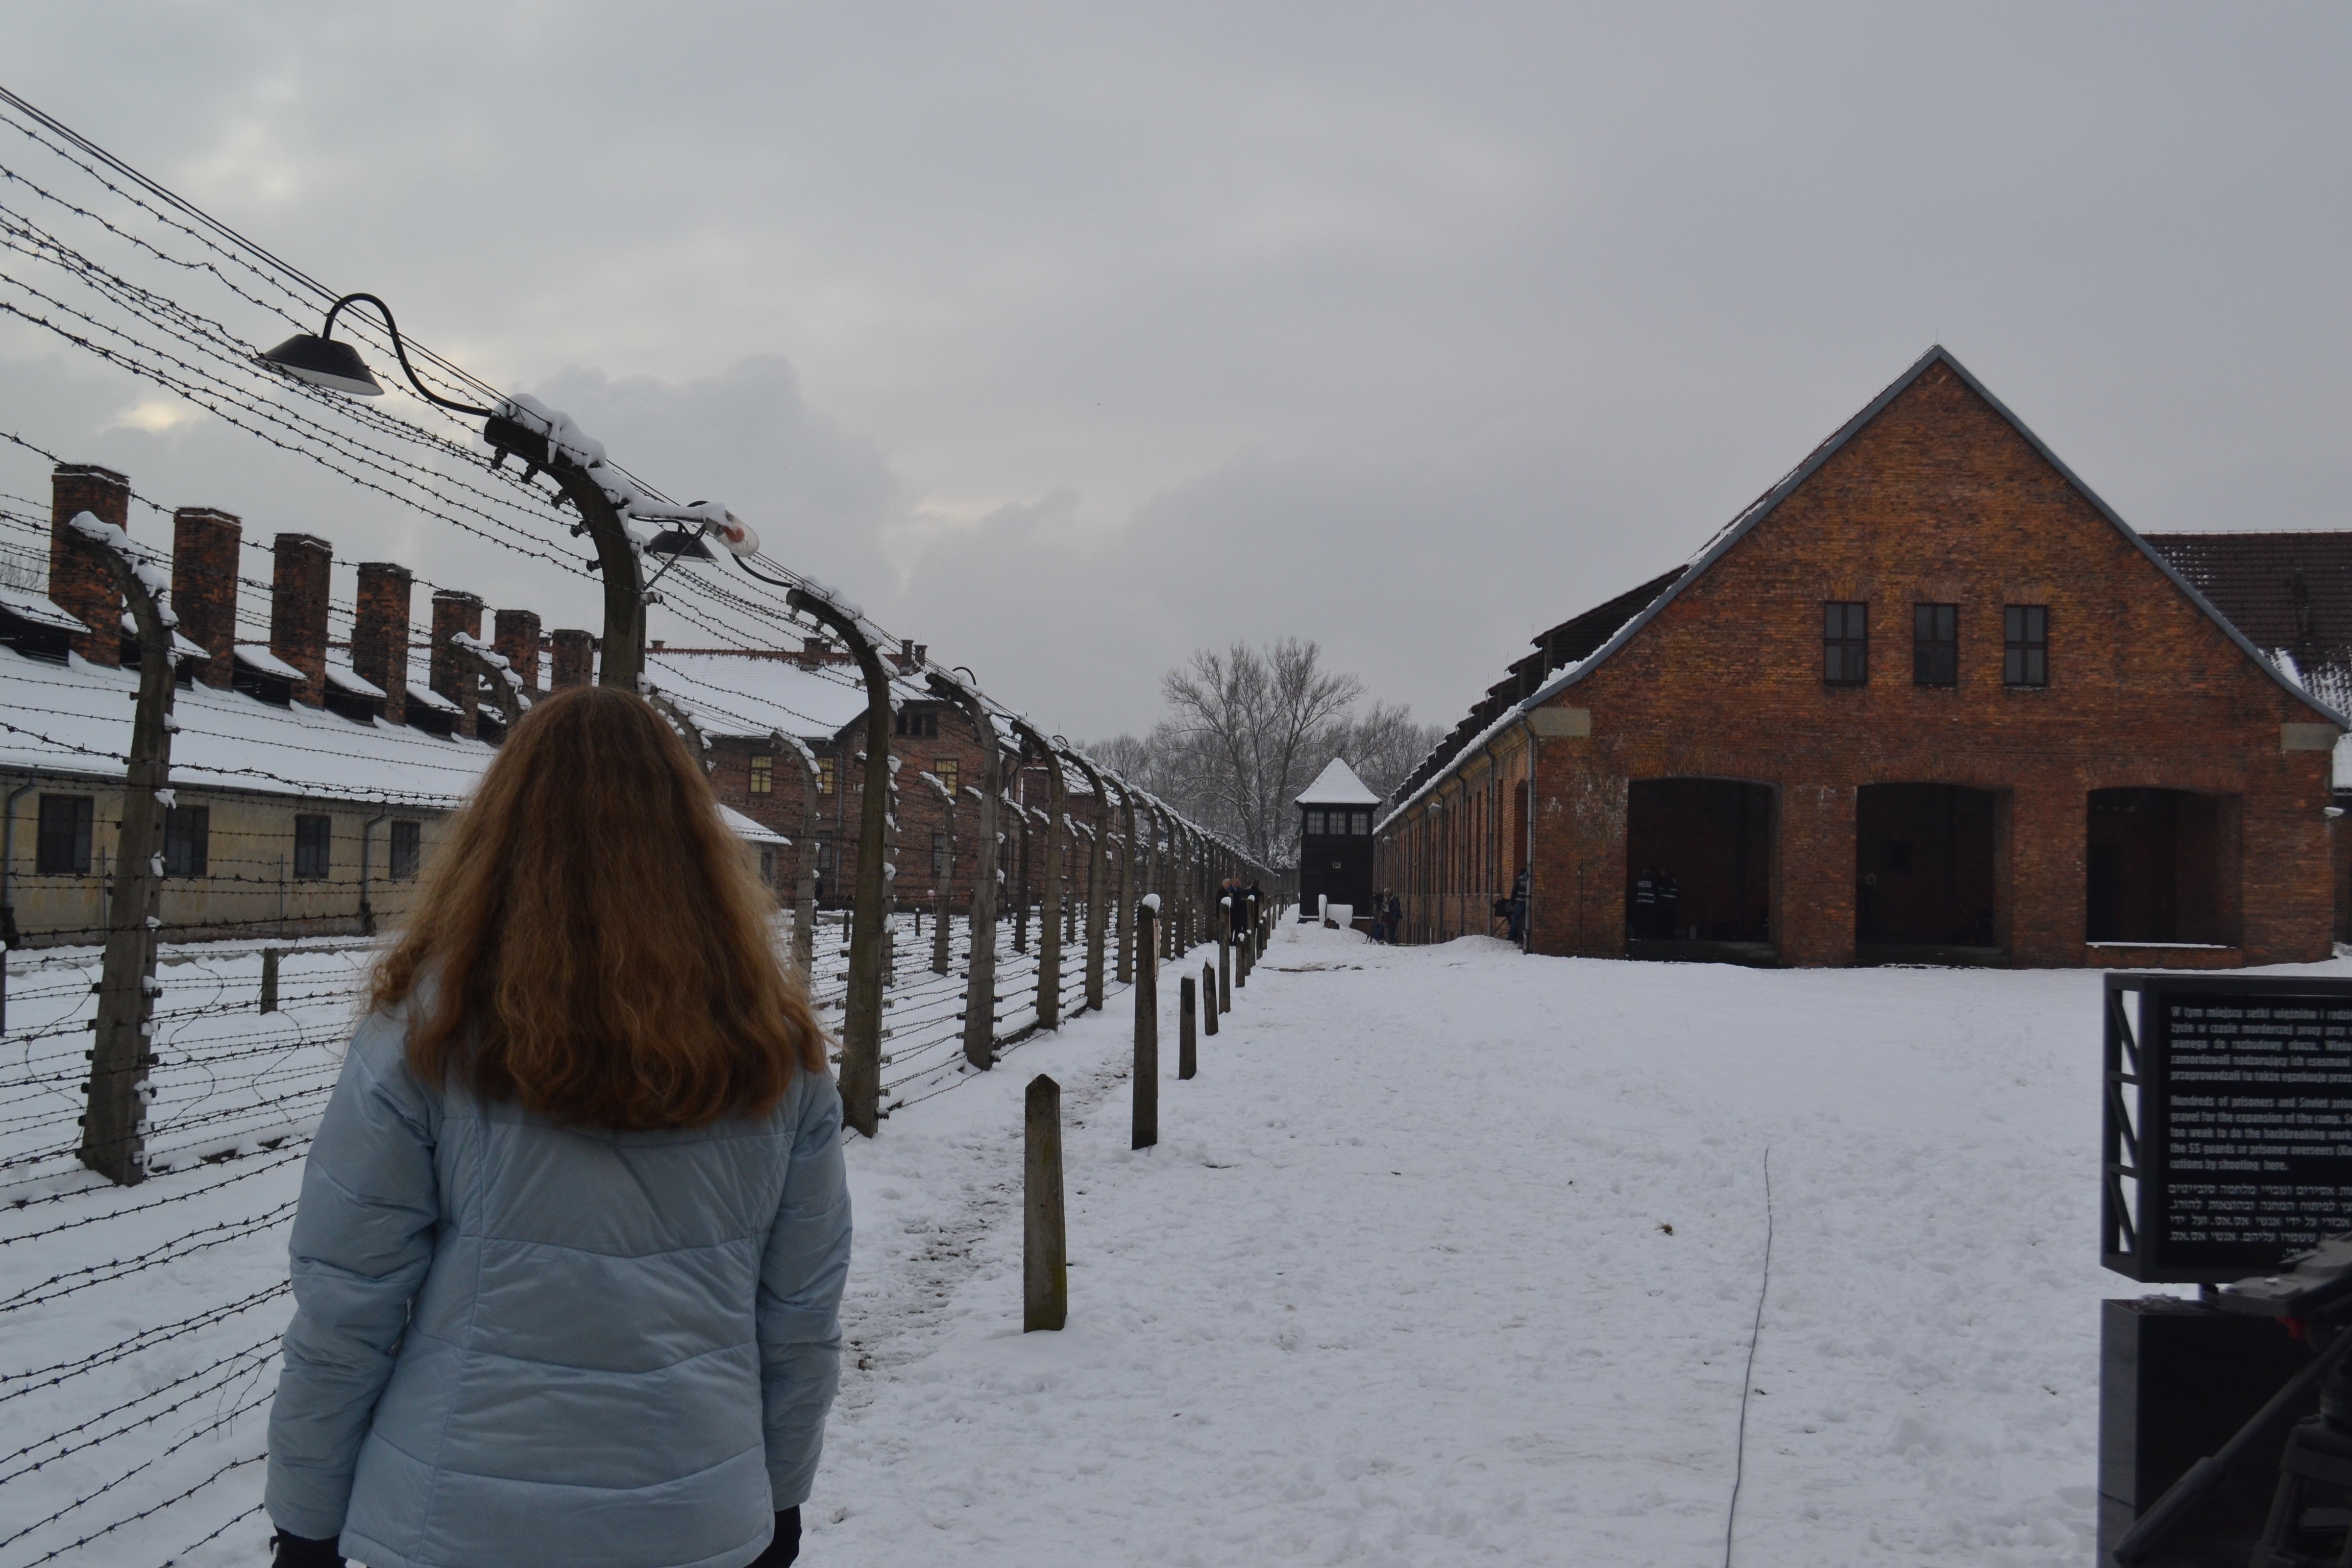 Me at the fence in Auschwitz.